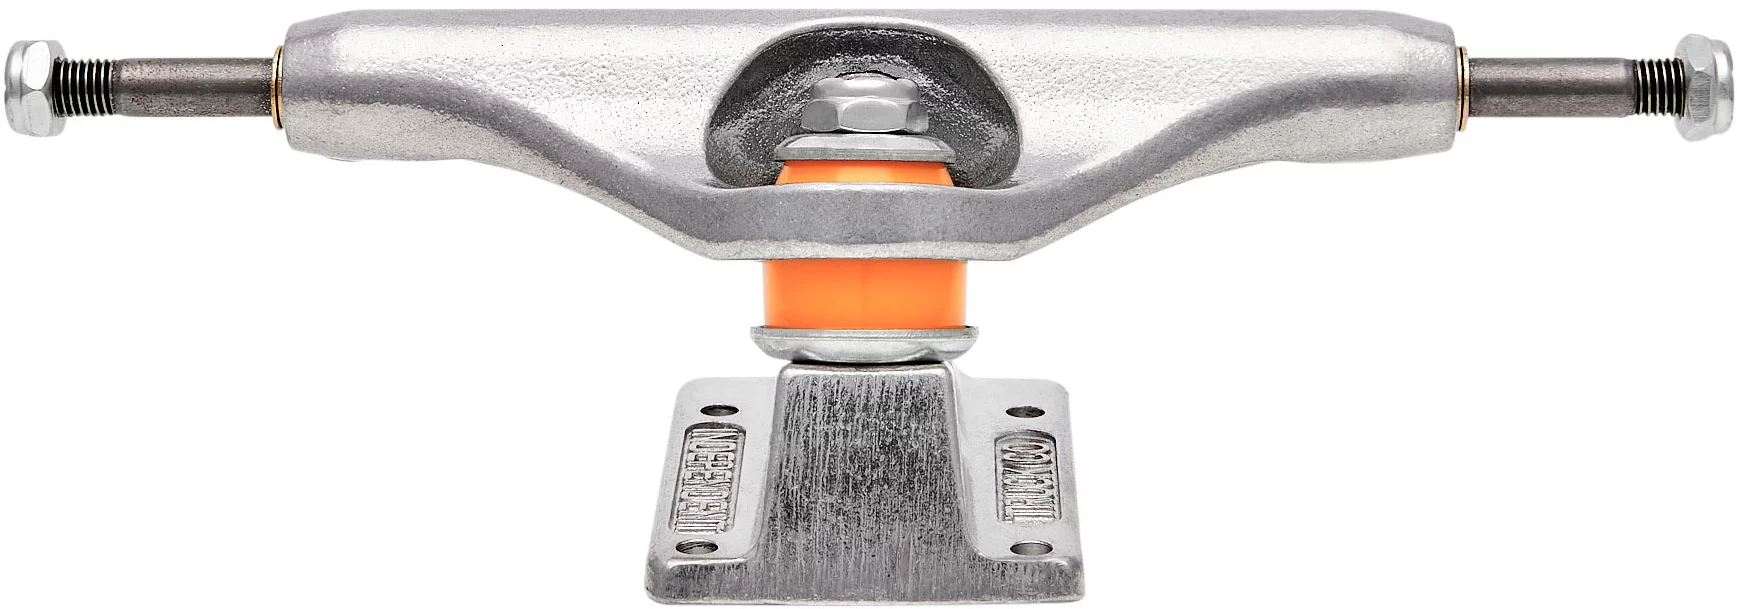 Independent Silver Stage 11 Skateboard Trucks - silver 144 | Tactics